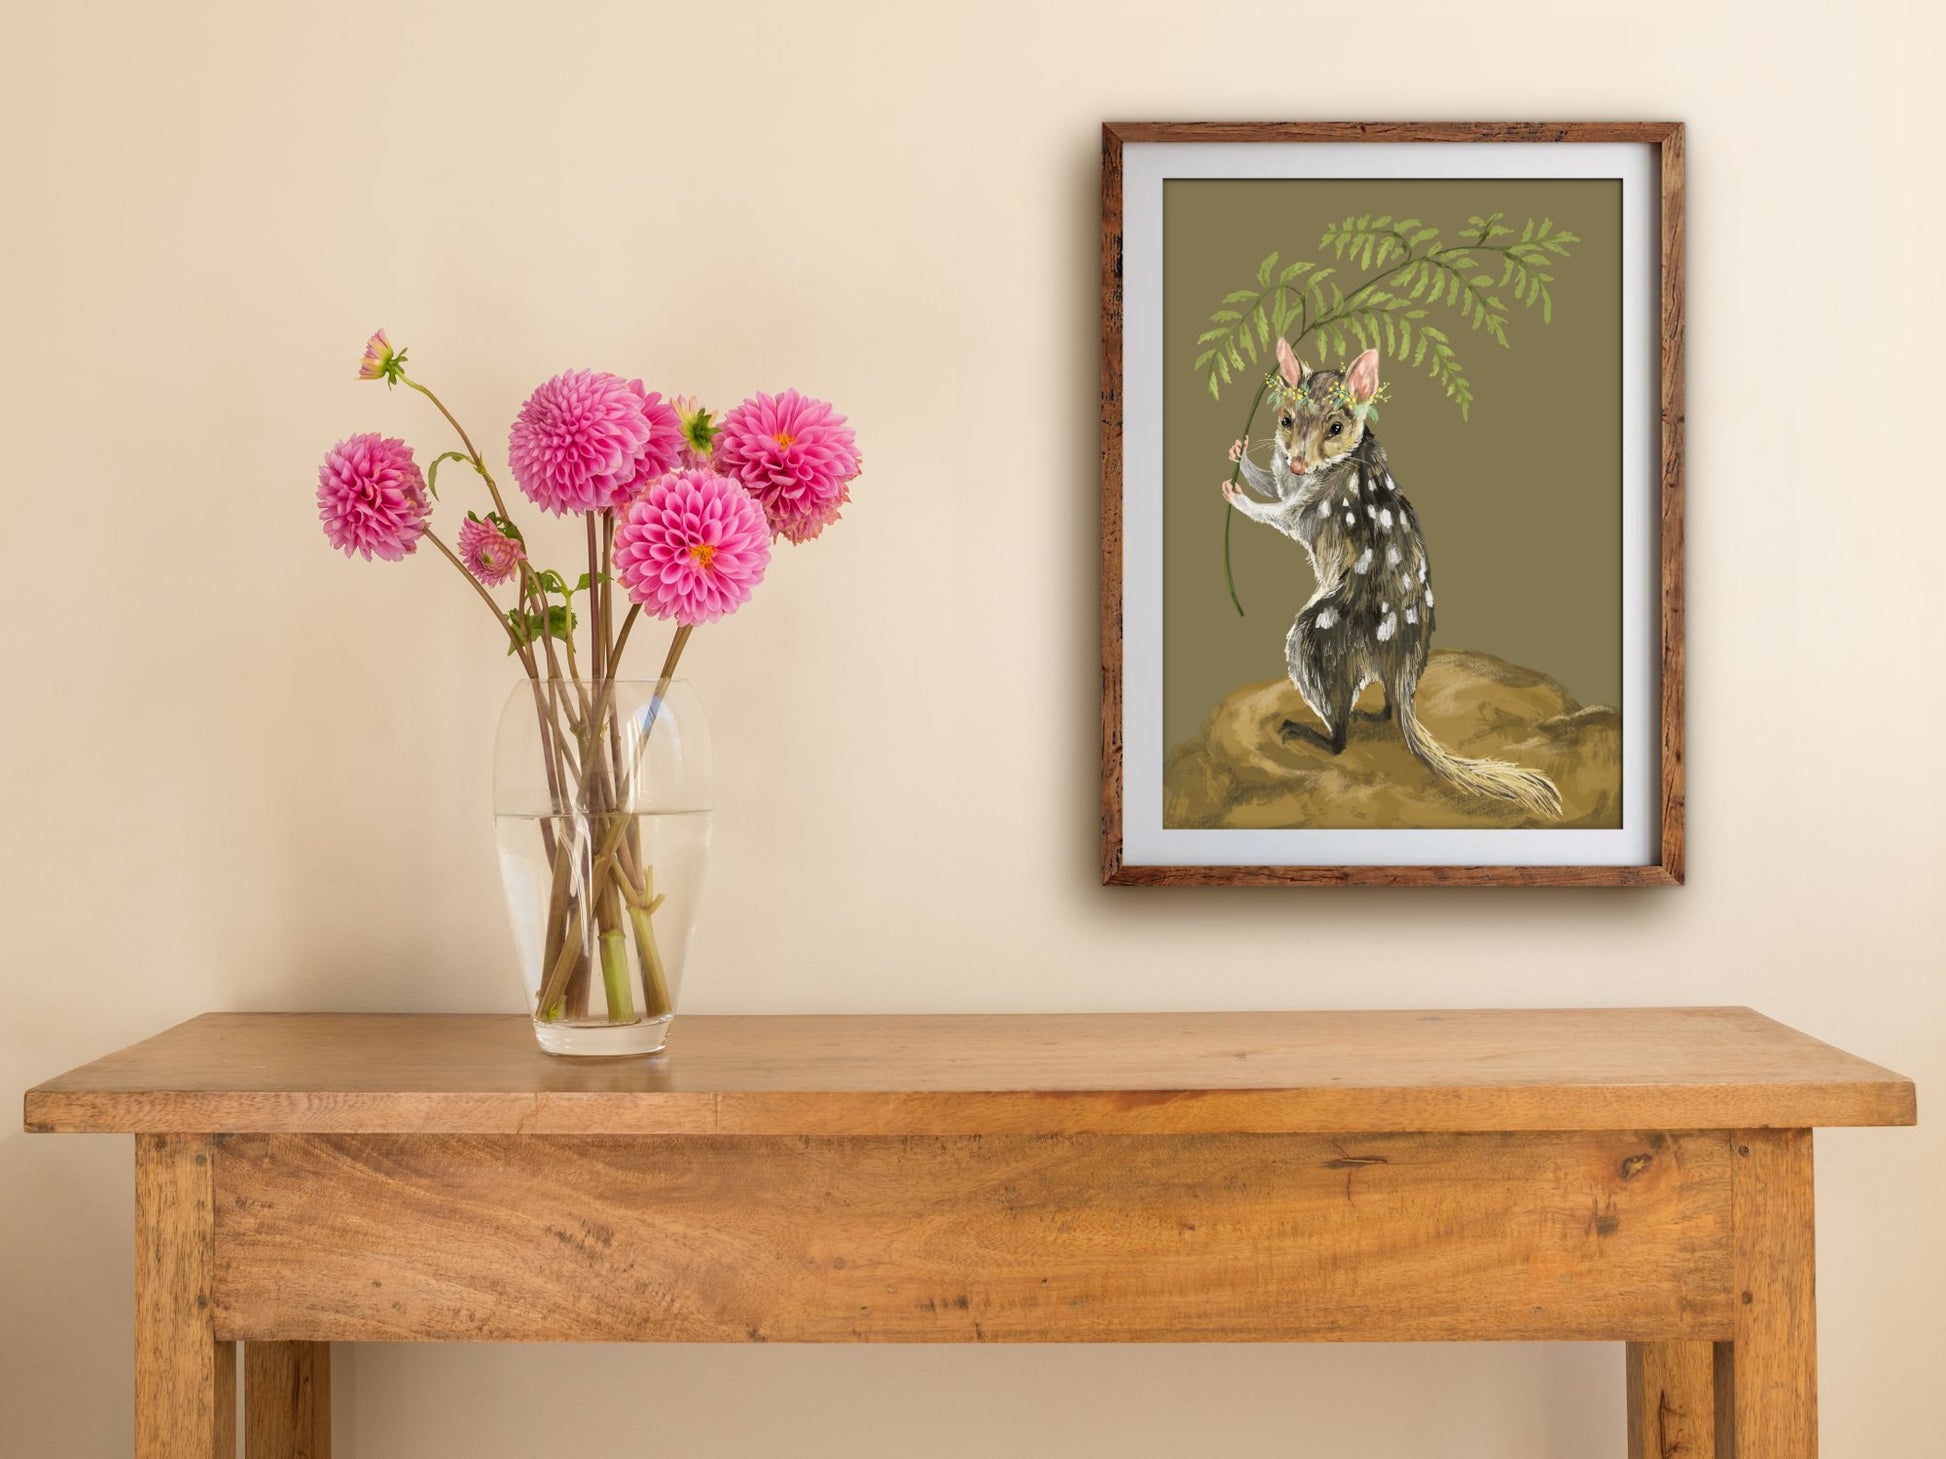 Anna Seed Art | Art Print - Spotted Quoll - Nature illustration, wall art